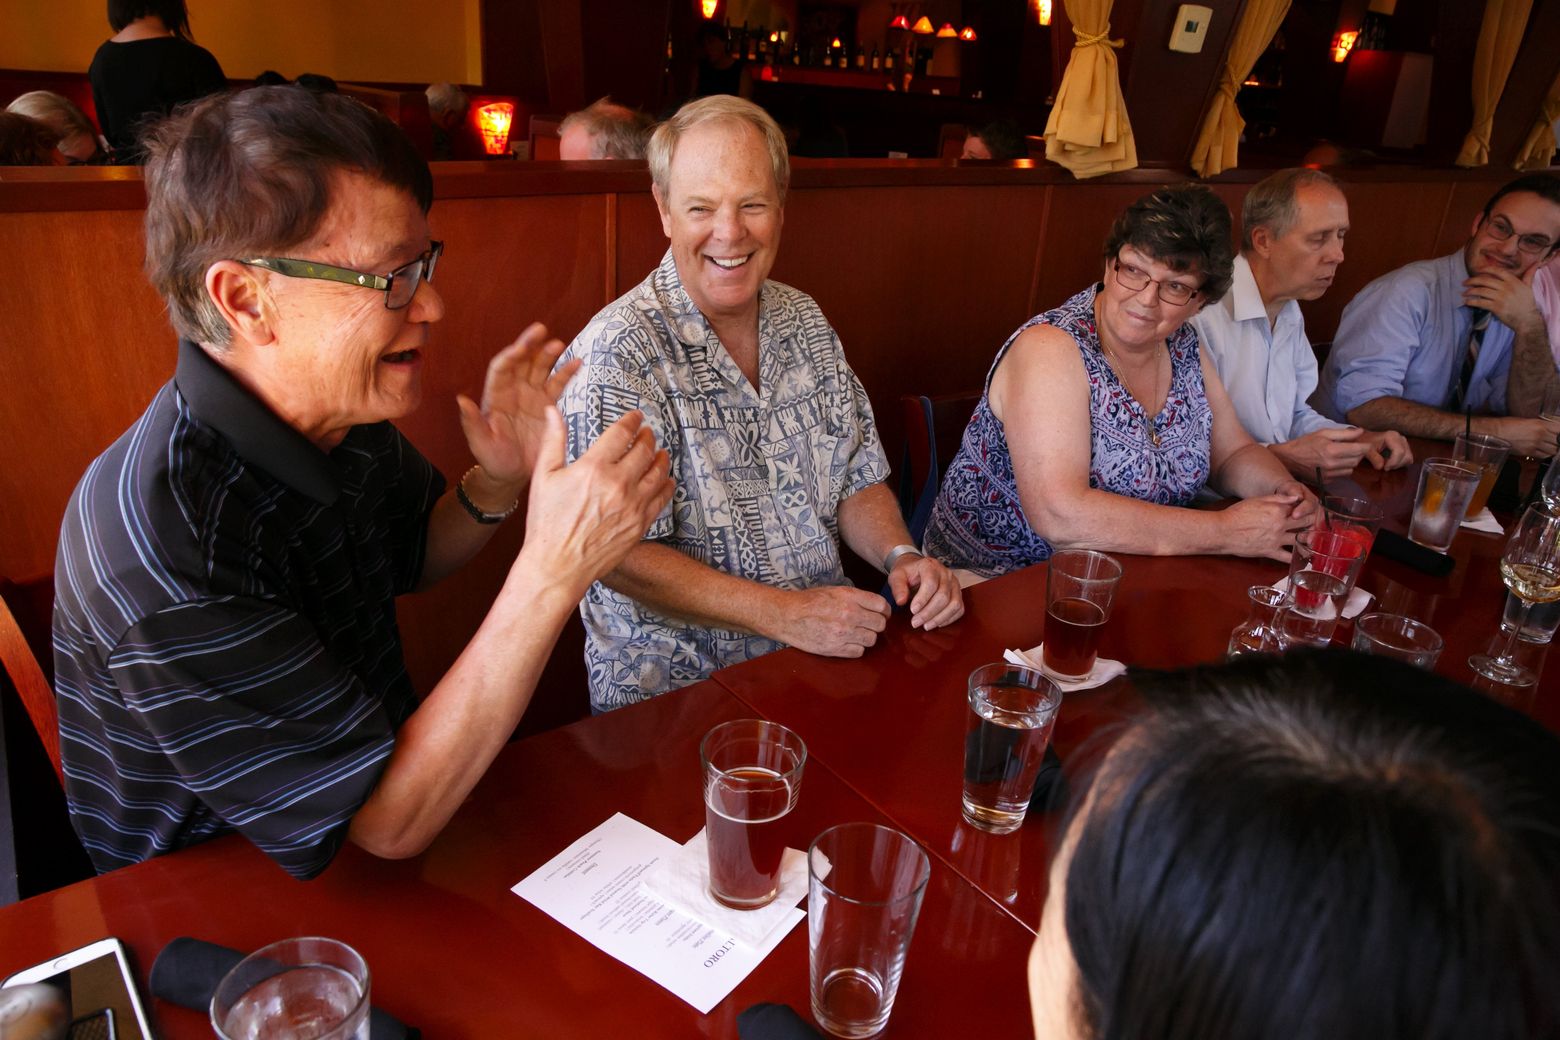 Joseph Huang, left, and Robert Bangs chat during a Prostate Club dinner gathering. (Erika Schultz/The Seattle Times)